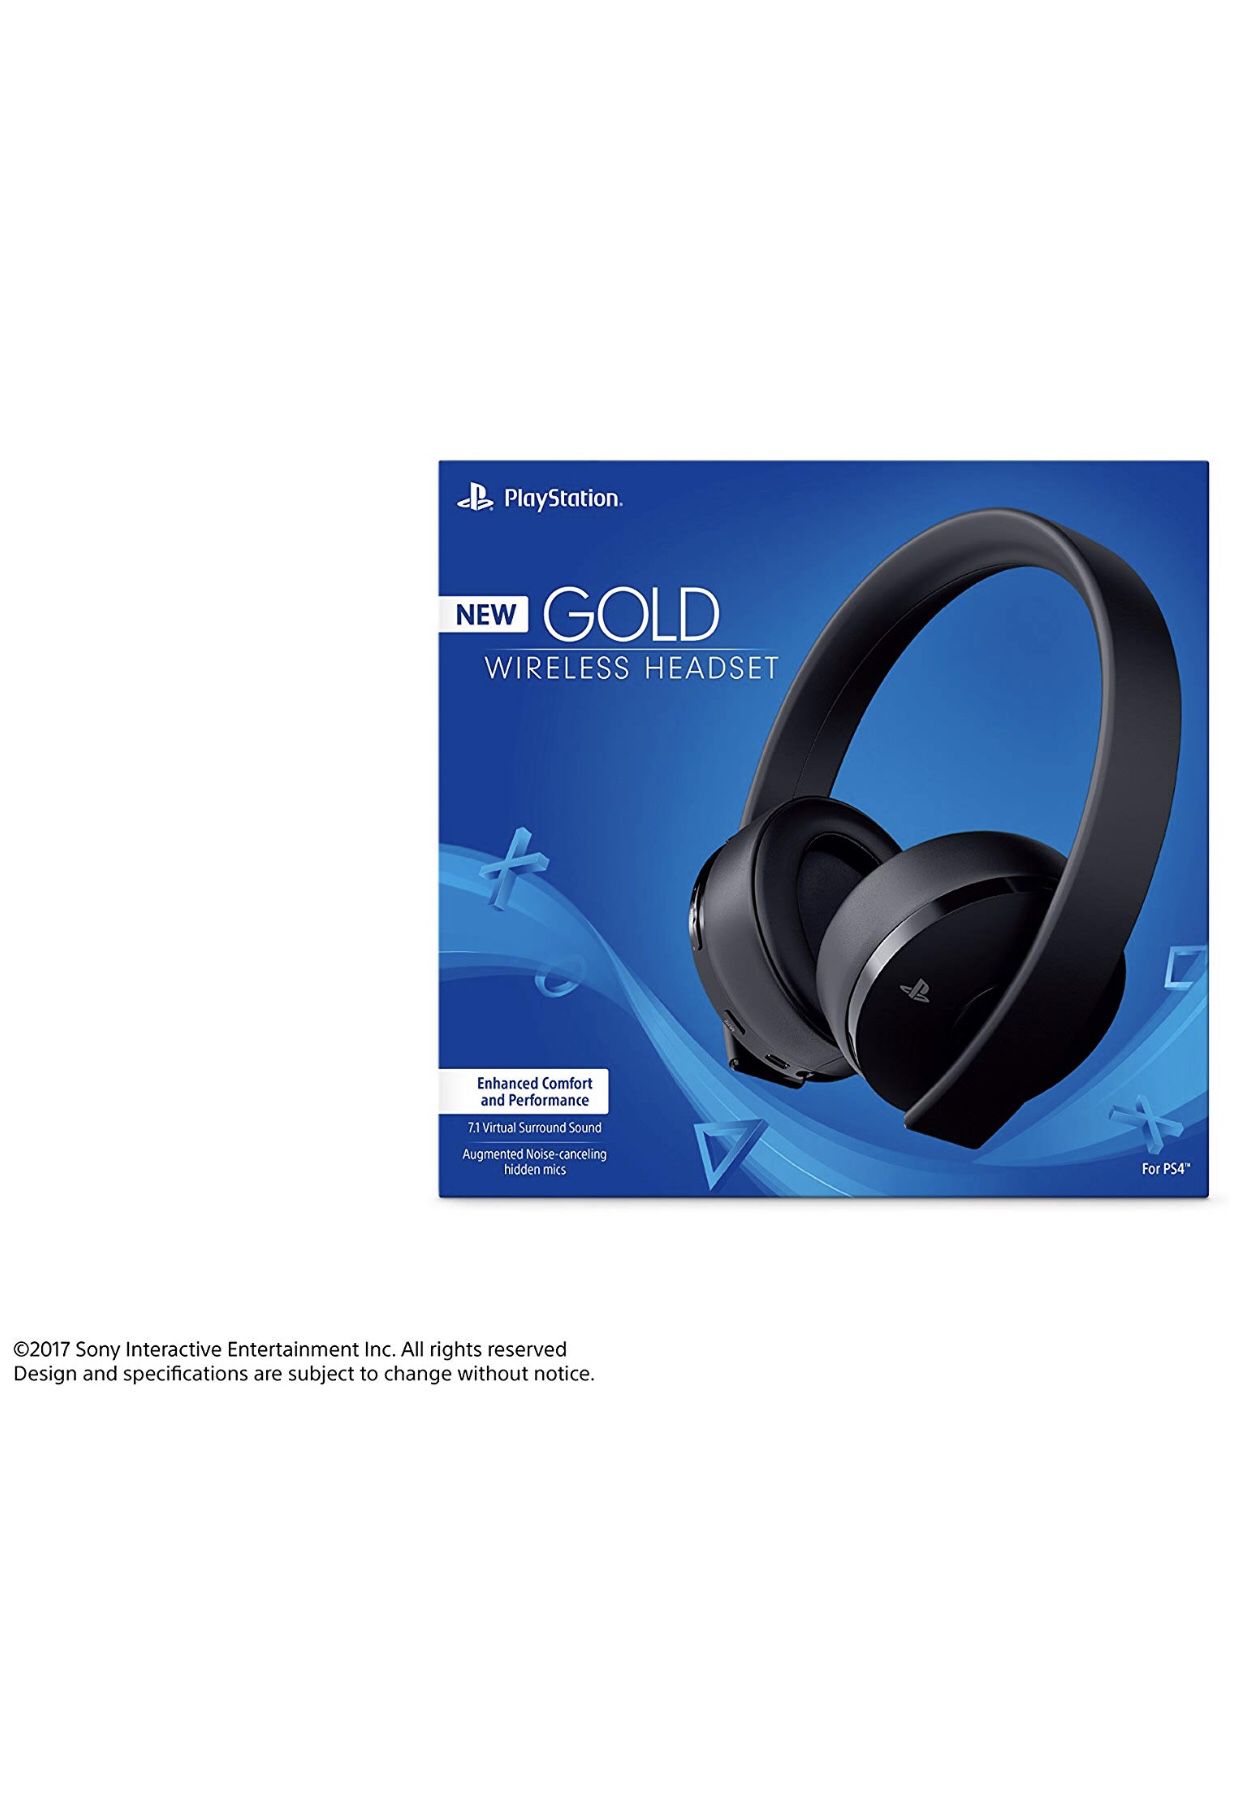 PS4 gold wireless headset comes w/ dongle